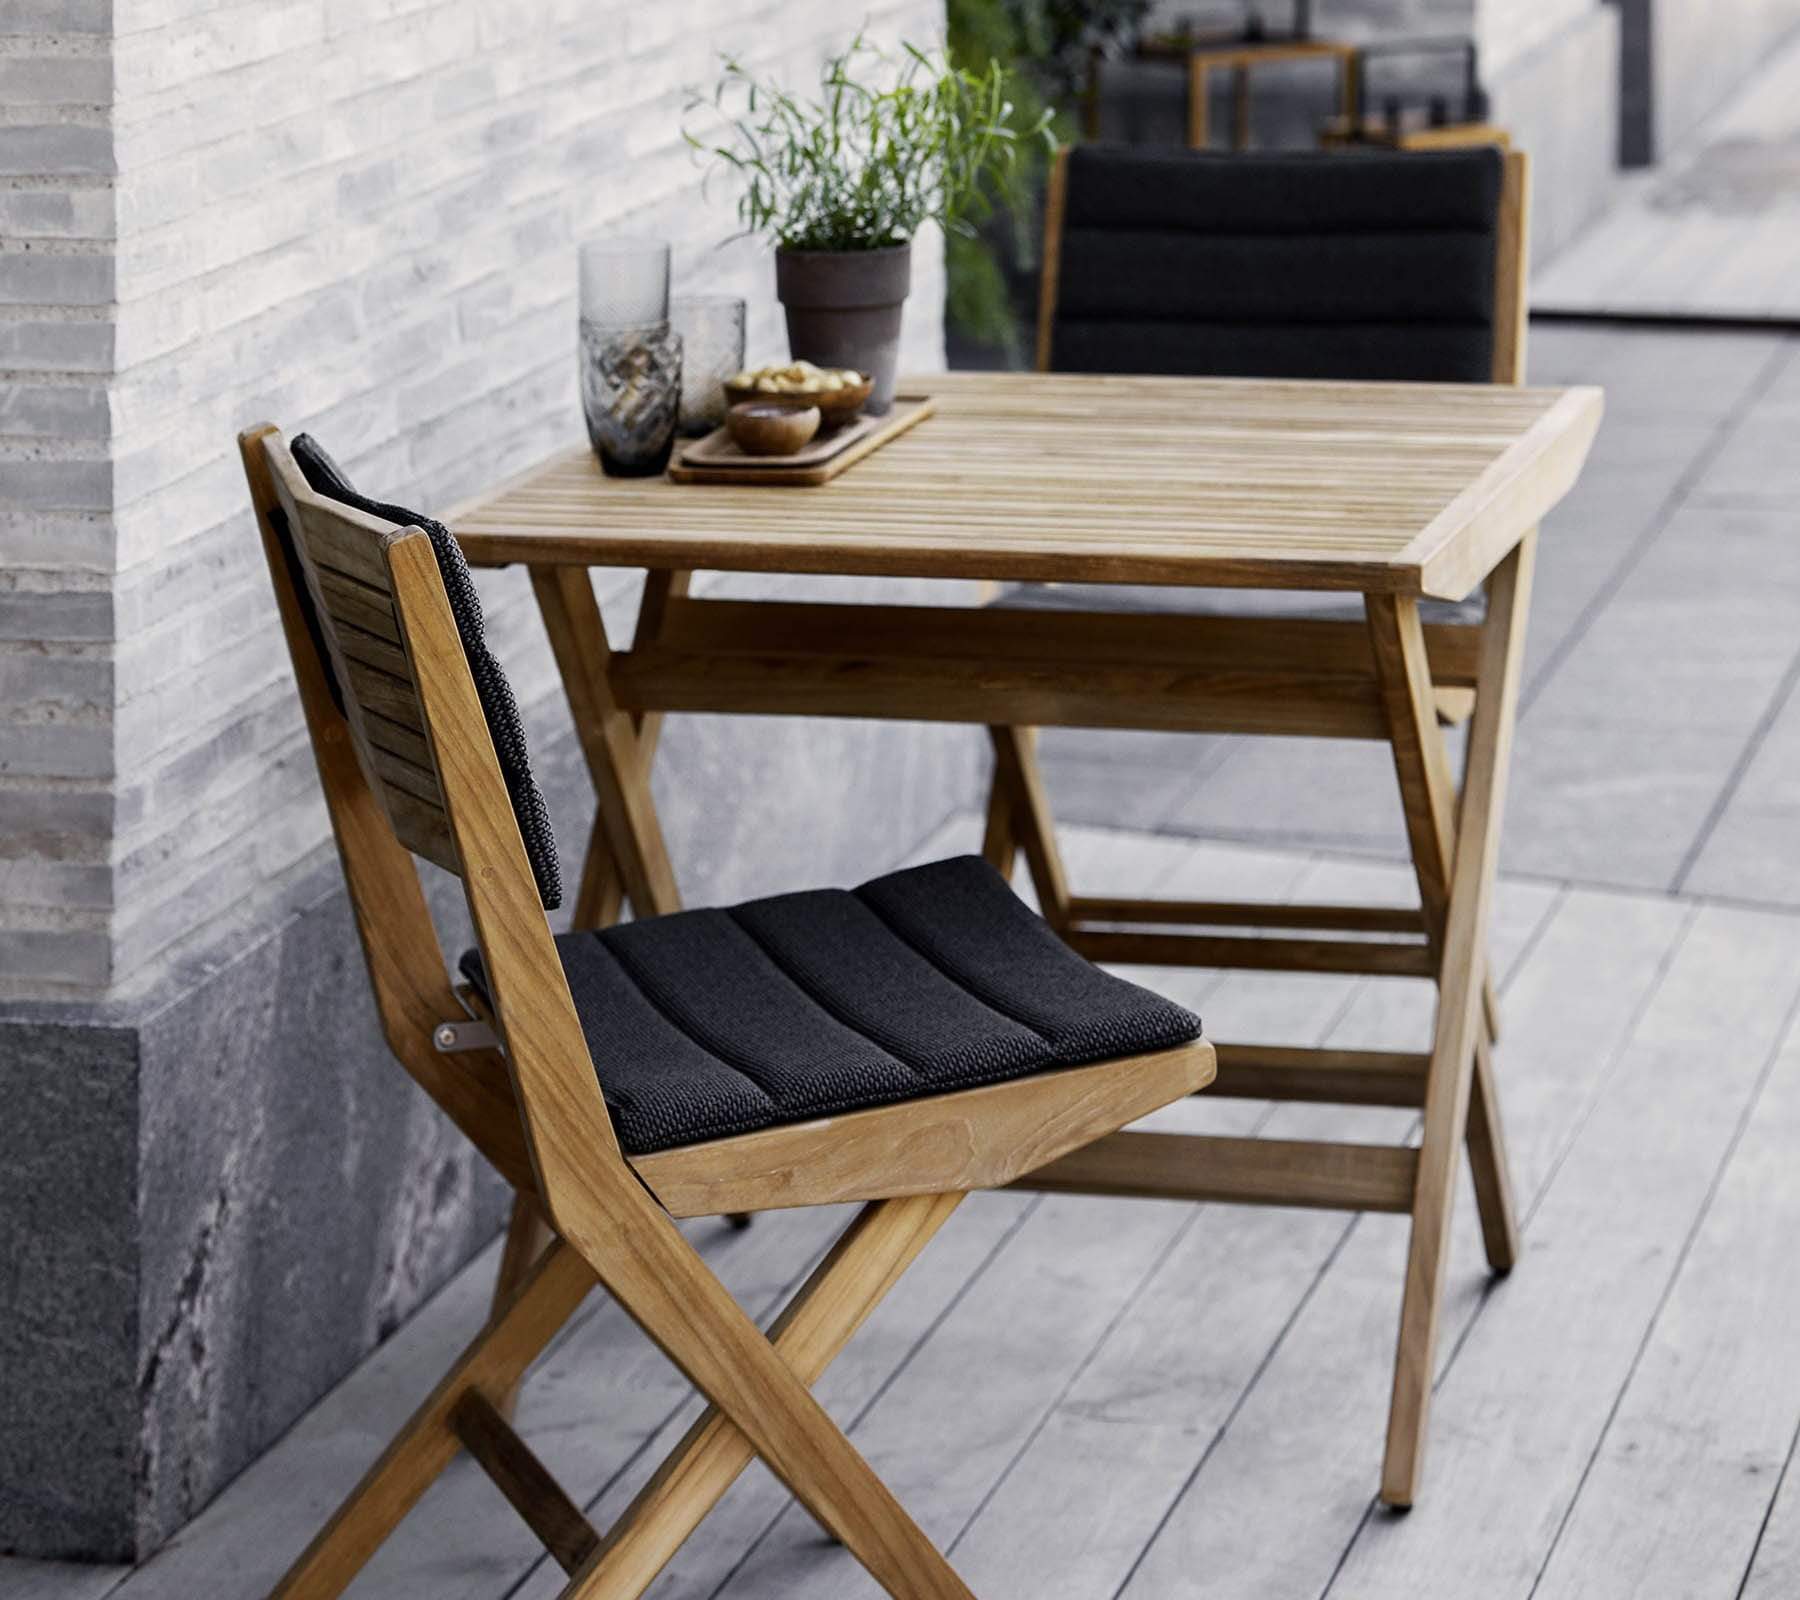 Boxhill's Flip Folding Outdoor Teak Dining chair with Dark Grey Cushion lifestyle image with Flip Folding Outdoor Teak Dining Table beside the wall at patio